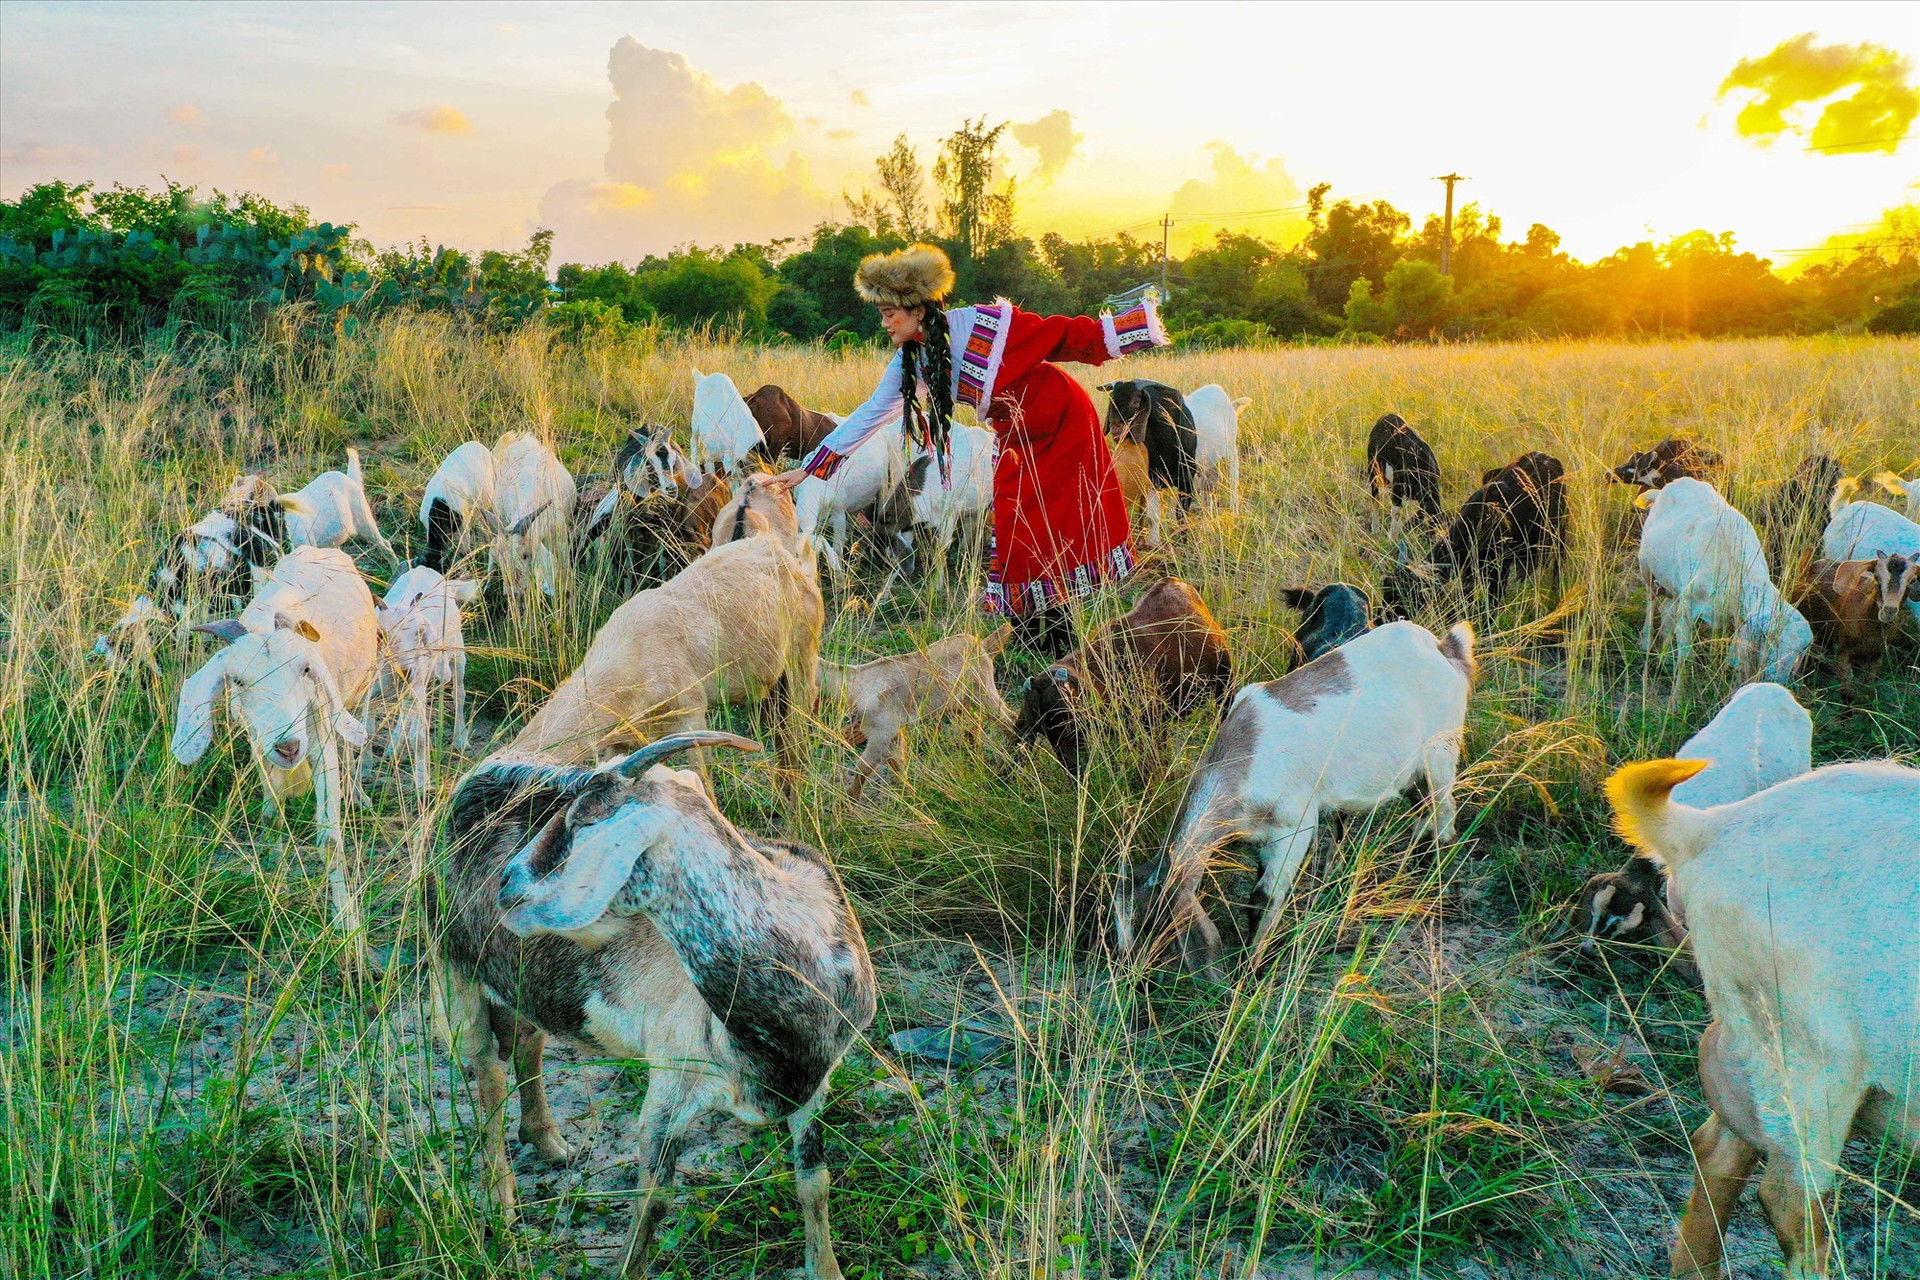 A girl dressed as a nomad to take photos with goats and grasslands